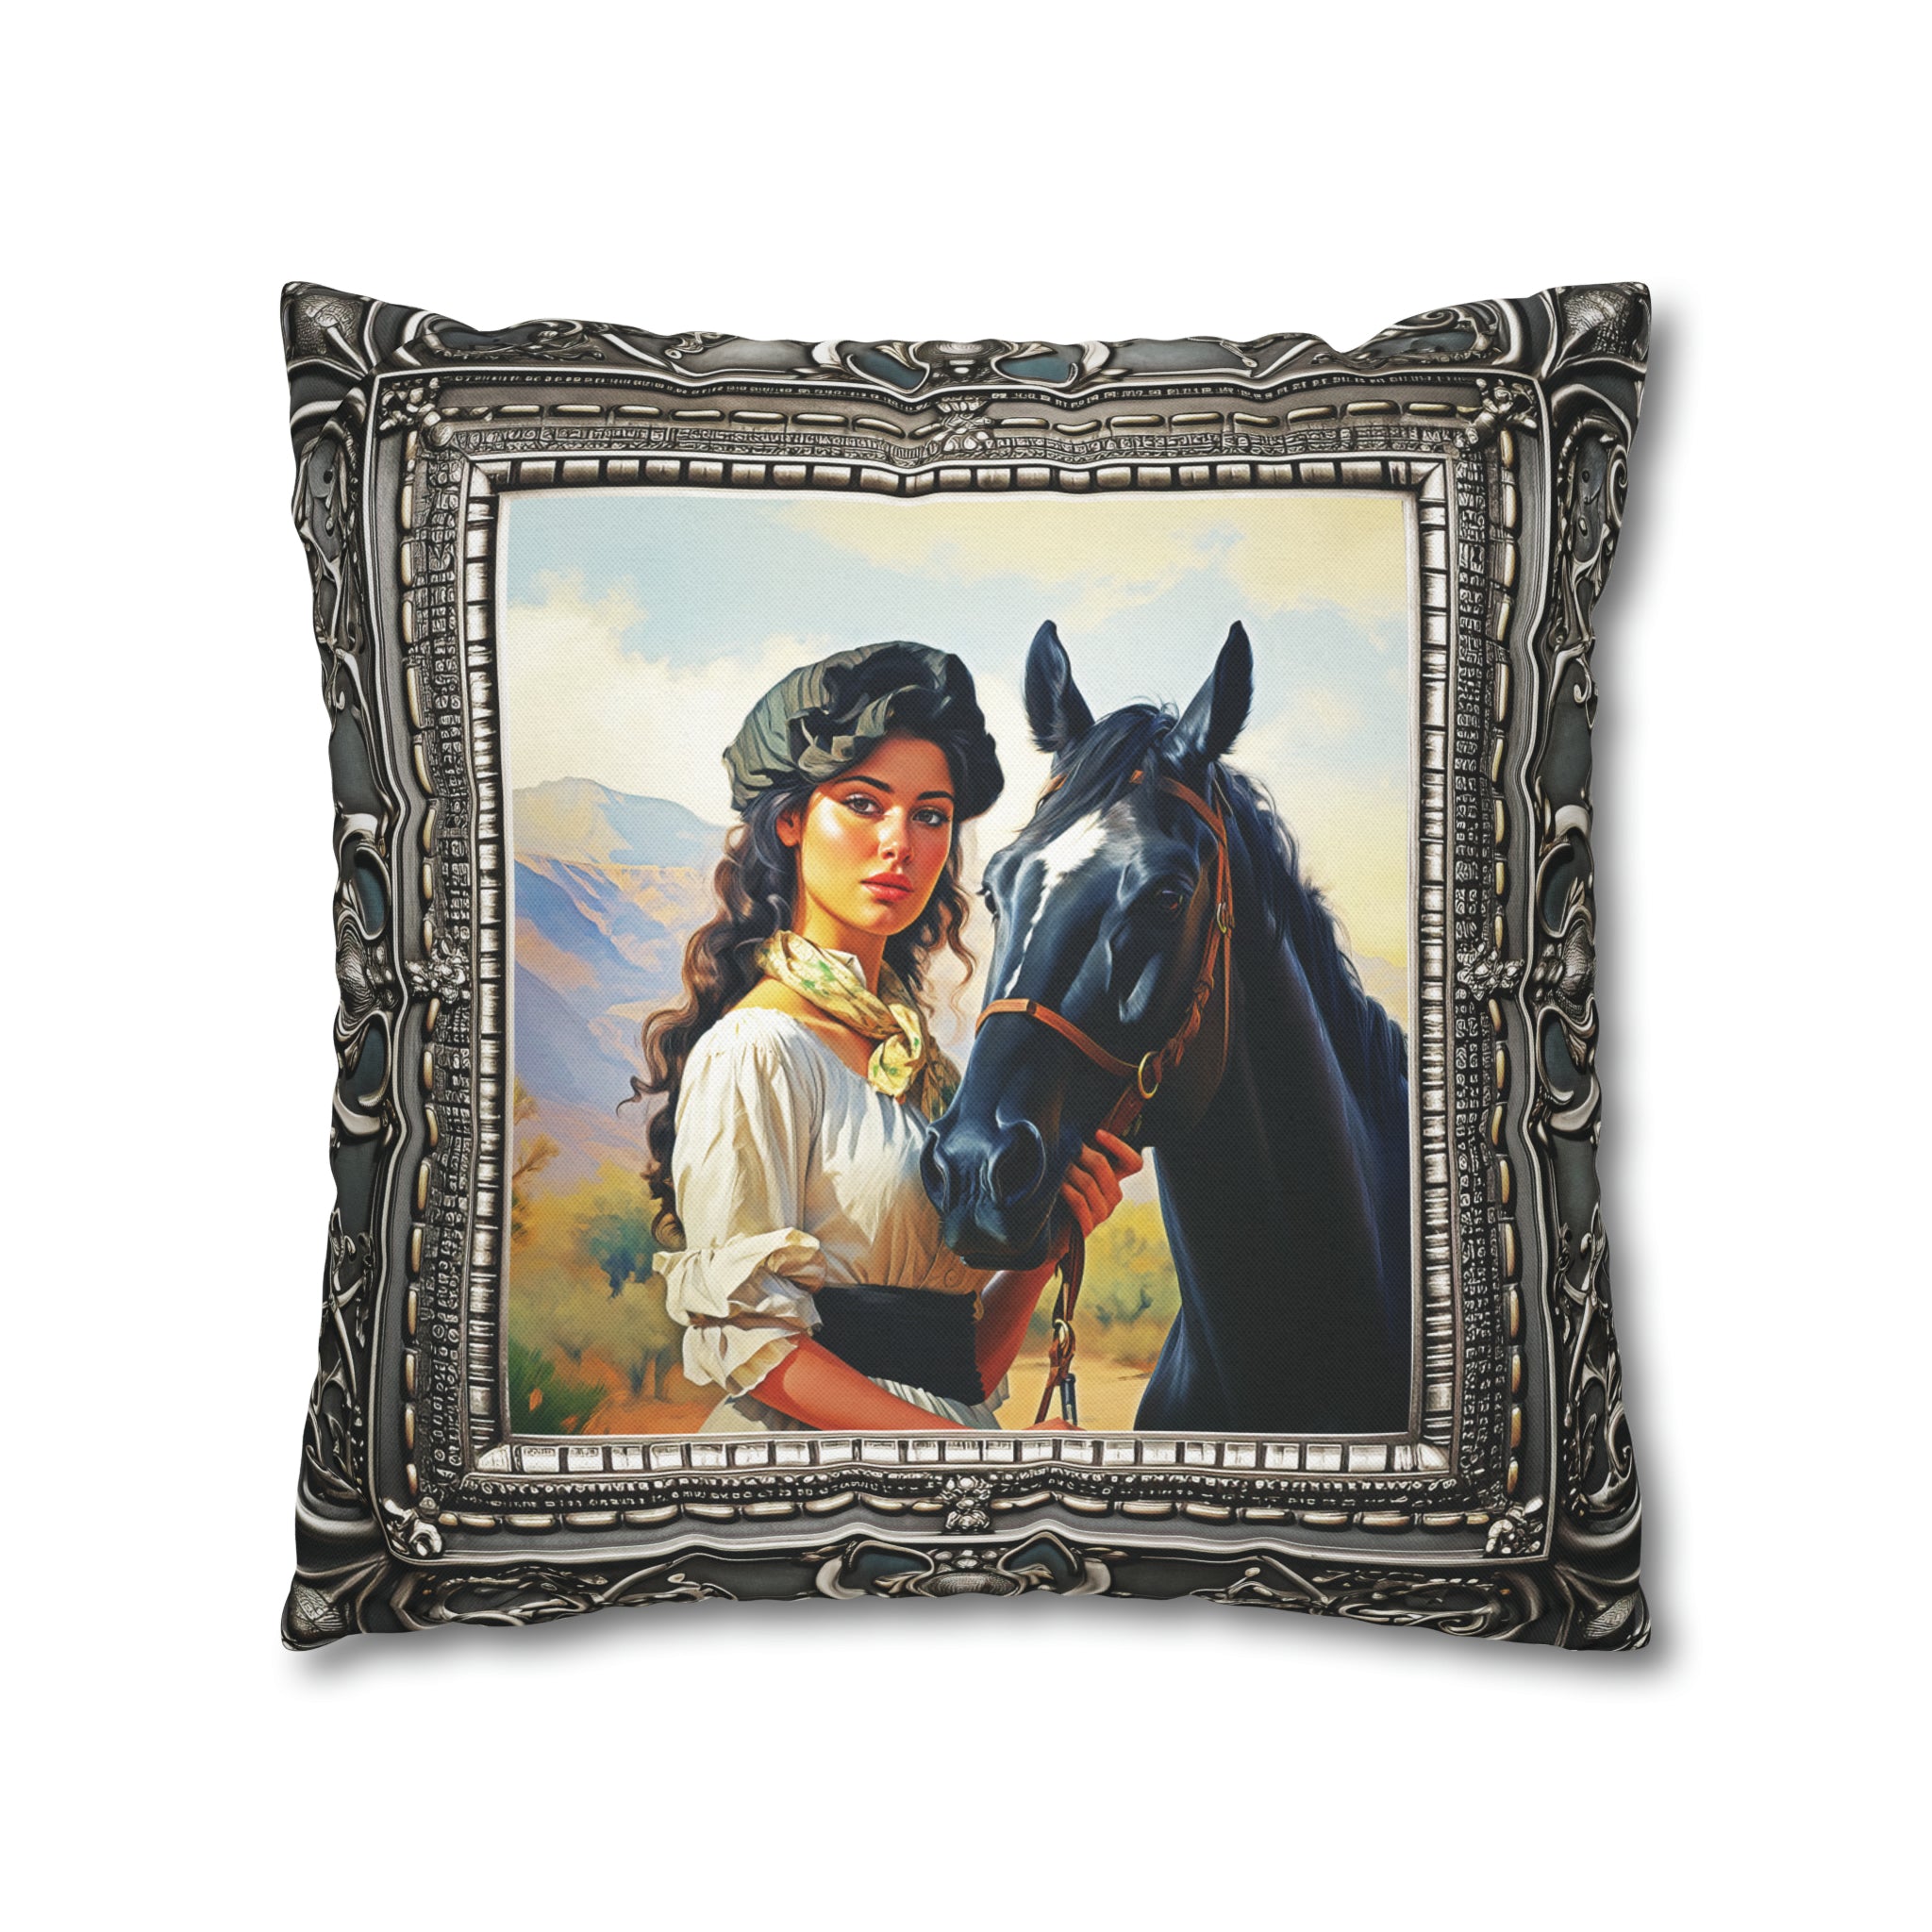 Square Pillow Case 18" x 18", CASE ONLY, no pillow form, original Art ,a Painting of a Tuscan Woman with Her Horse in the Countryside